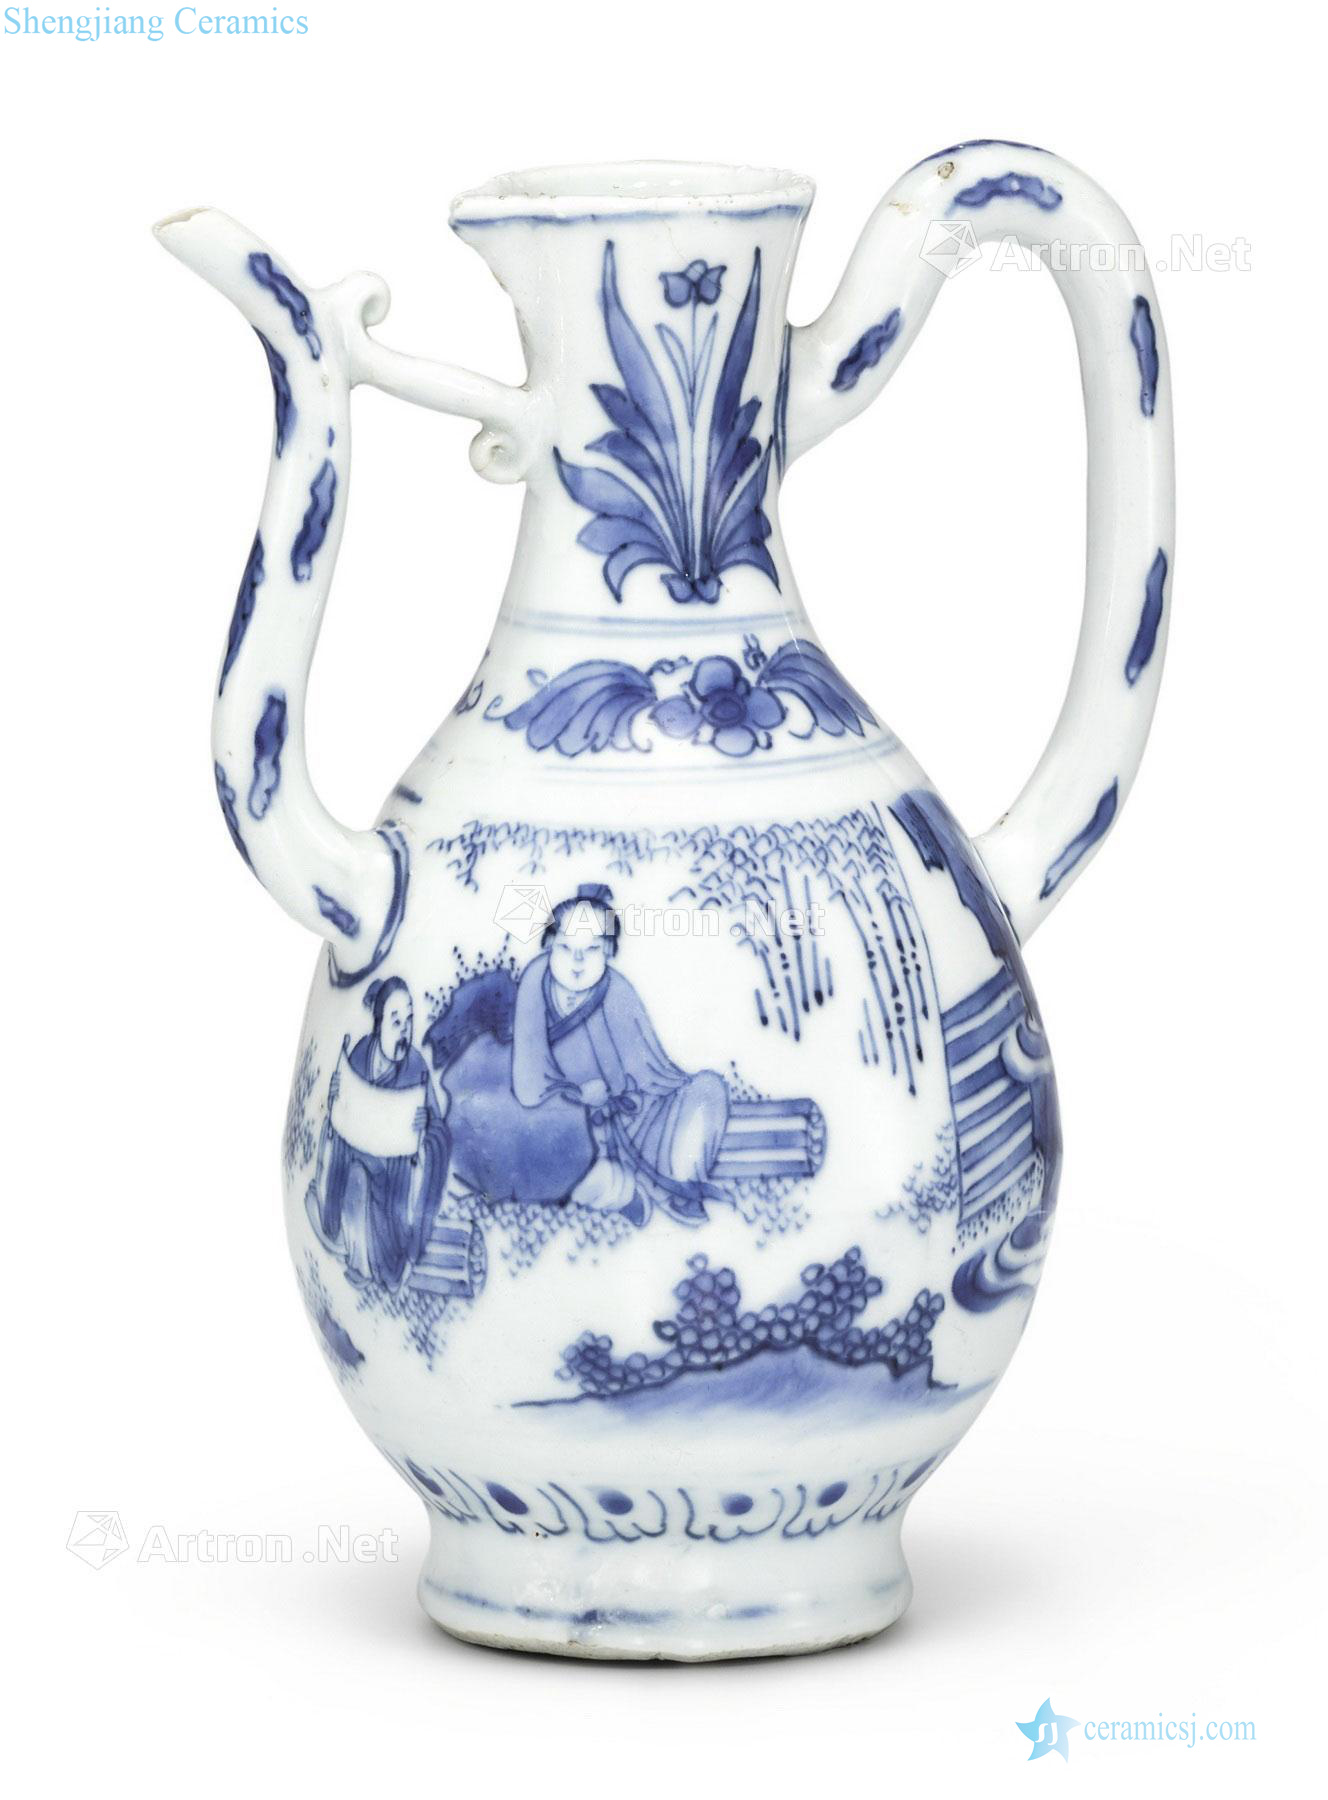 The late Ming dynasty Blue and white garden gather ewer